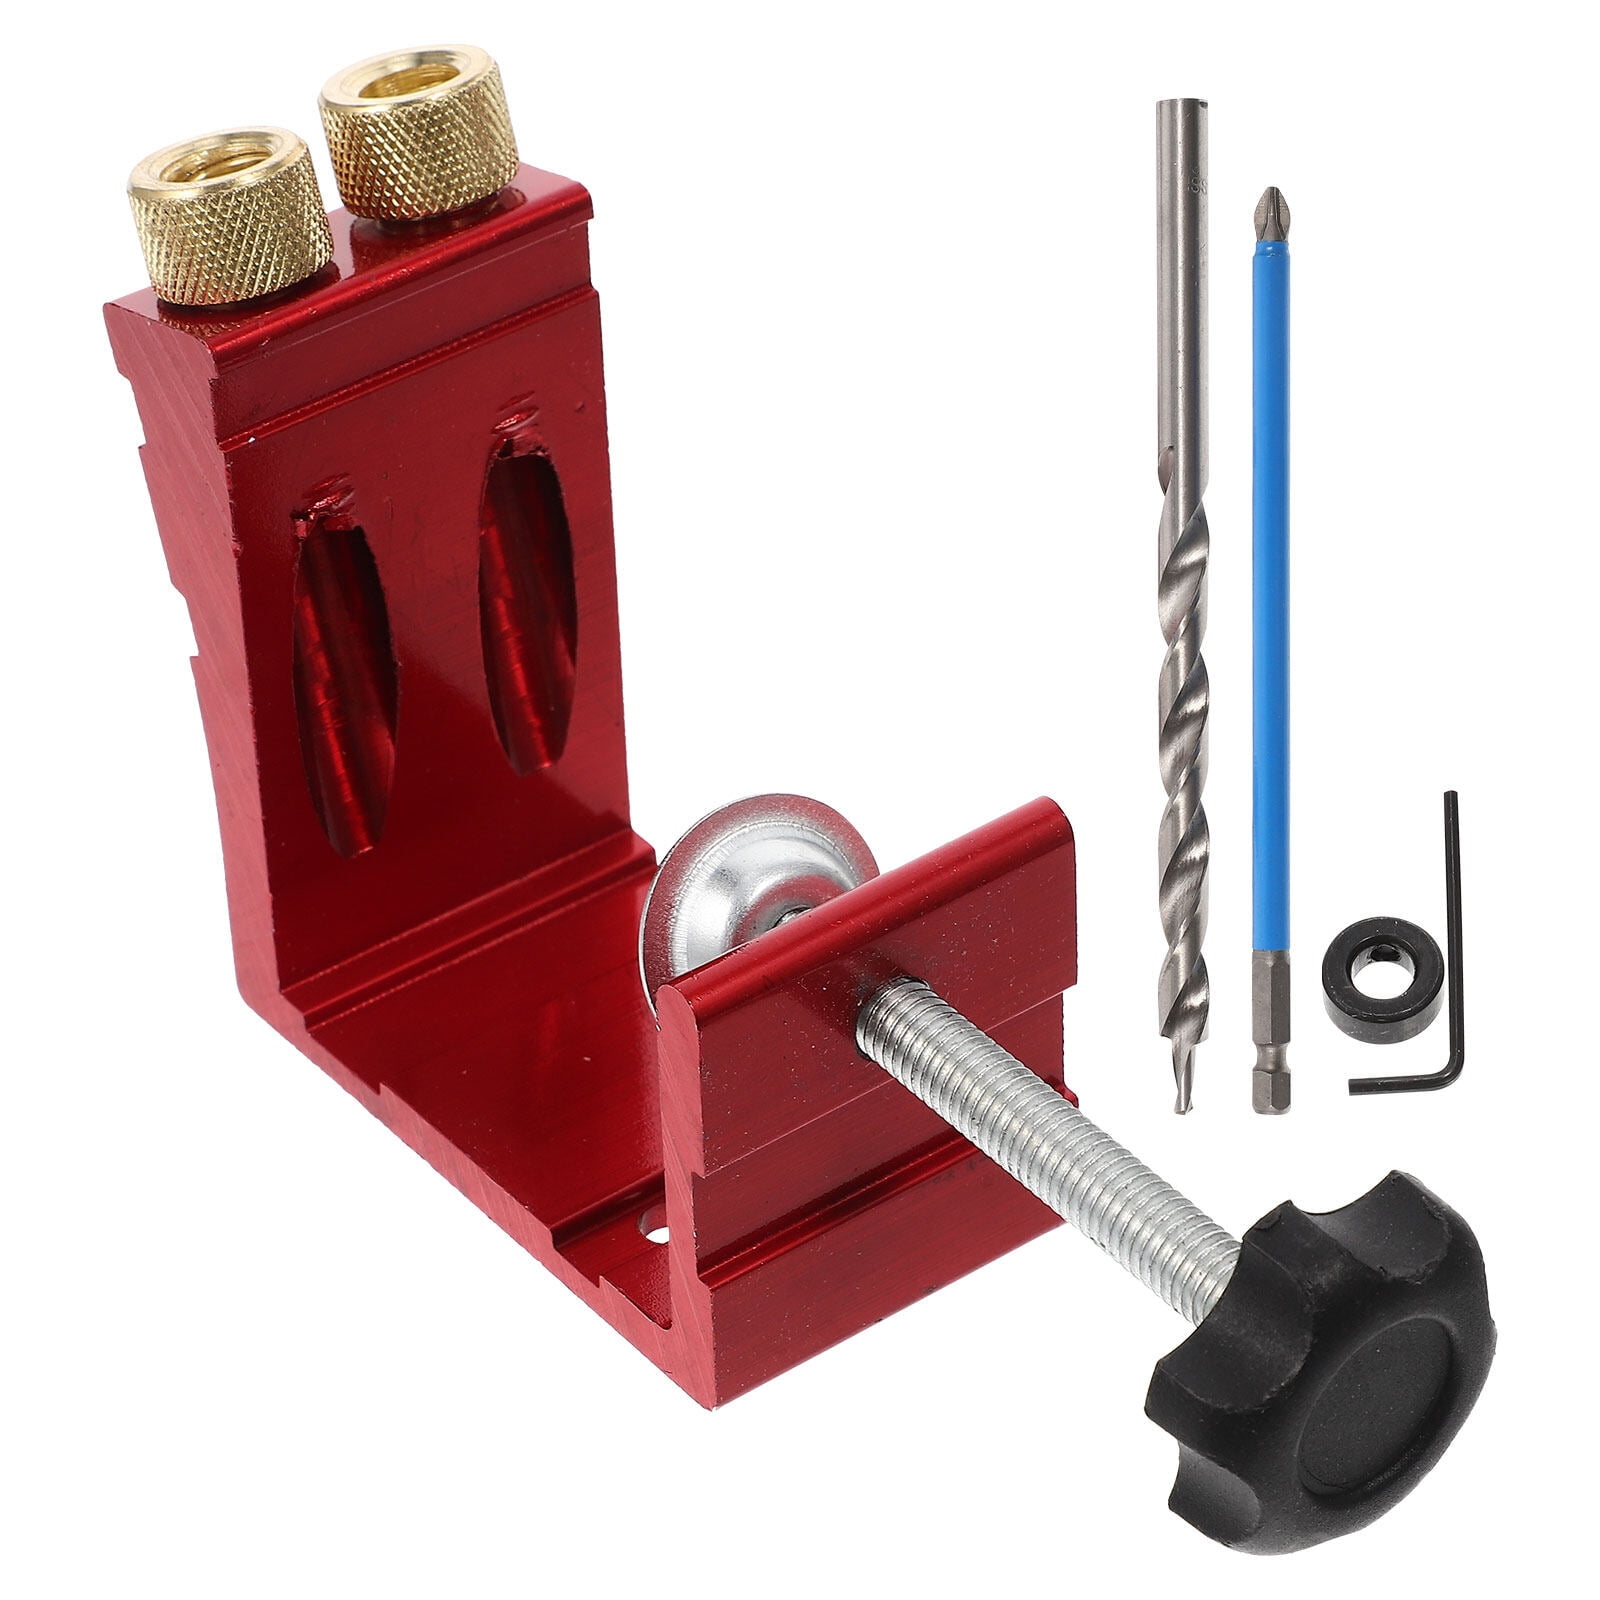 Pocket Hole Jig Kit, Pocket Hole Drill Guide Jig Set for 15° Angled Holes,  for Woodworking Angle Drilling Holes A 